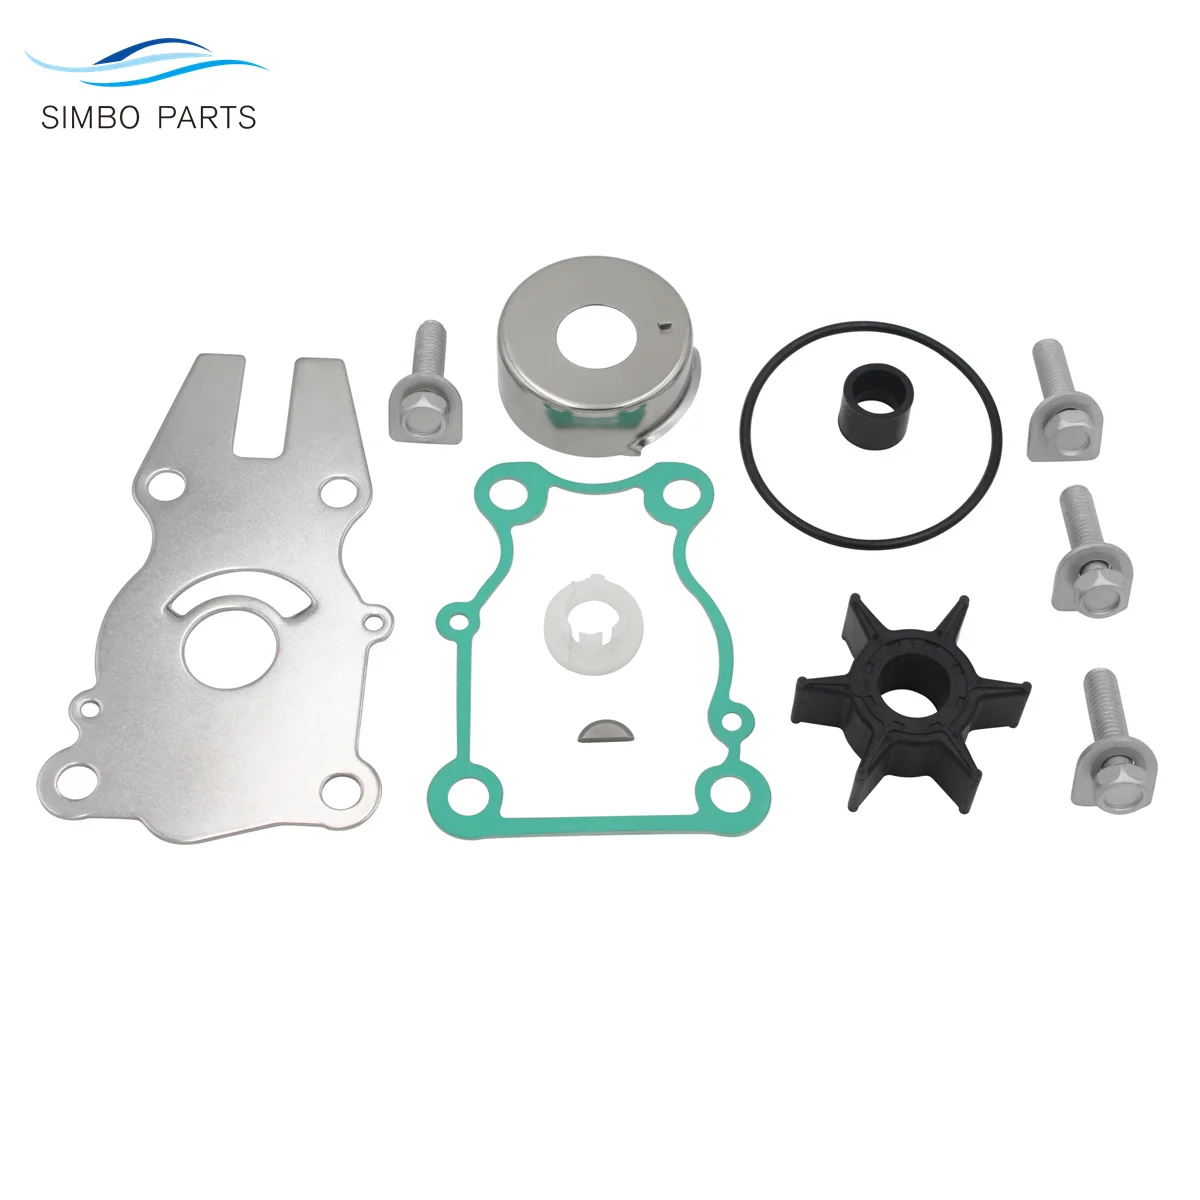 

Water Pump Impeller Kit For Yamaha 4-Stroke 30 40 HP F30 F40A Outboard 6BG-W0078-00 6BG-W0078-01 18-3490